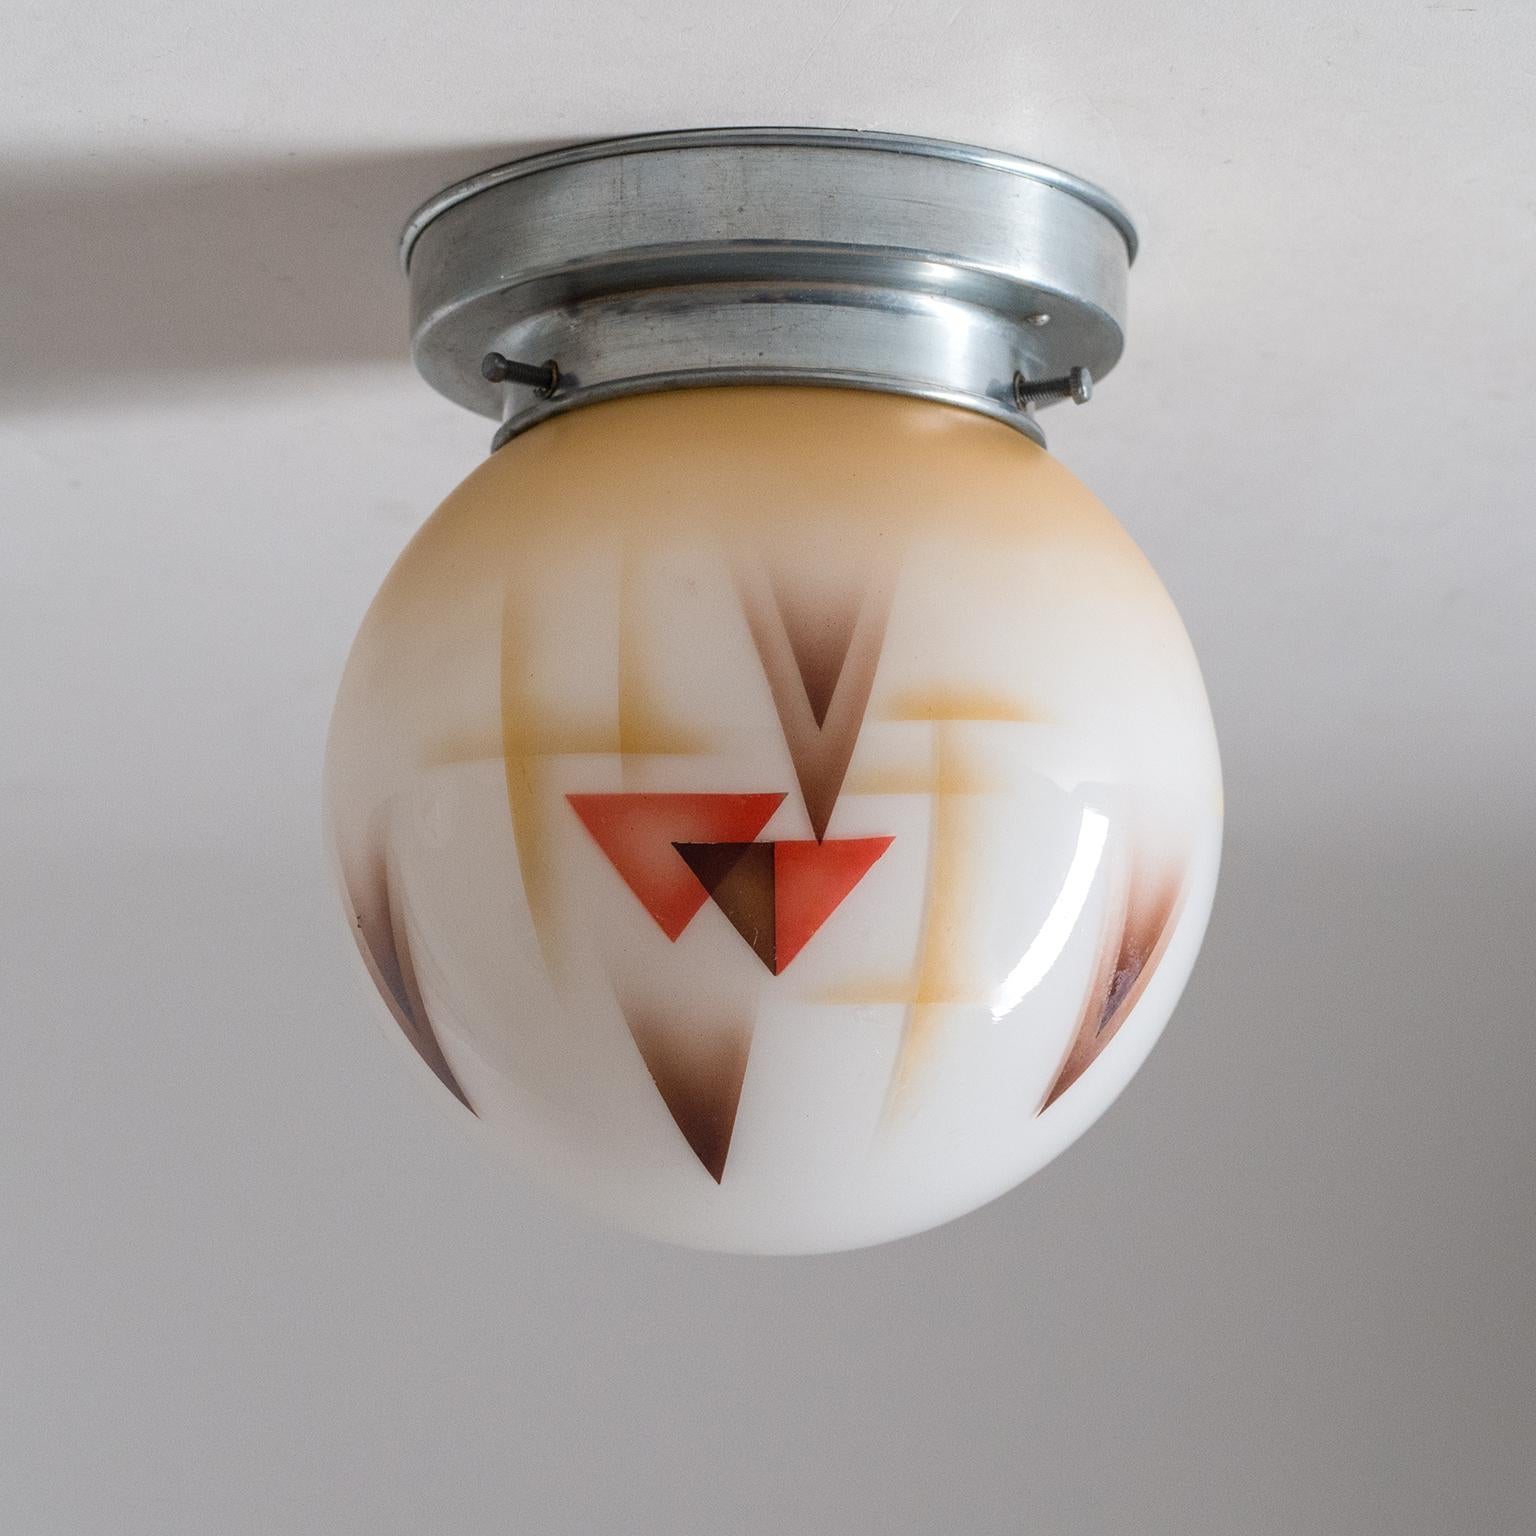 Pair of Art Deco Ceiling or Wall Lights, circa 1930, Enameled Glass 7